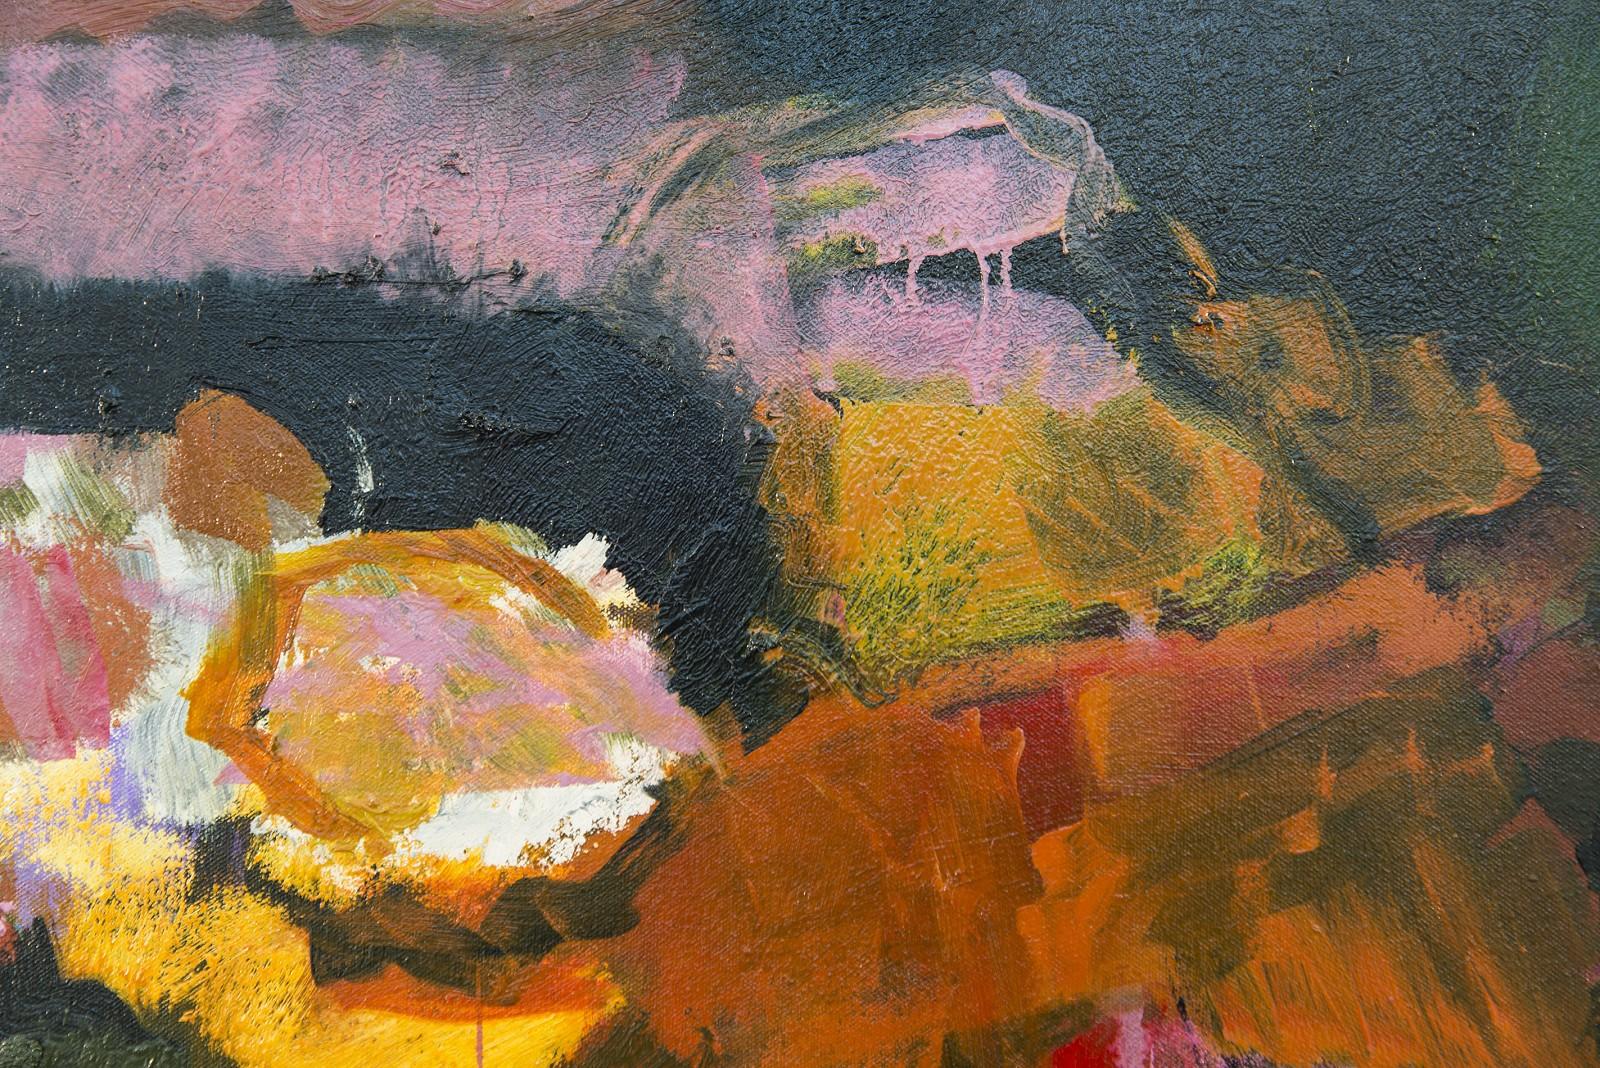 Yellow Buckle with Pinks - large, floral, abstracted still life, oil on canvas For Sale 1